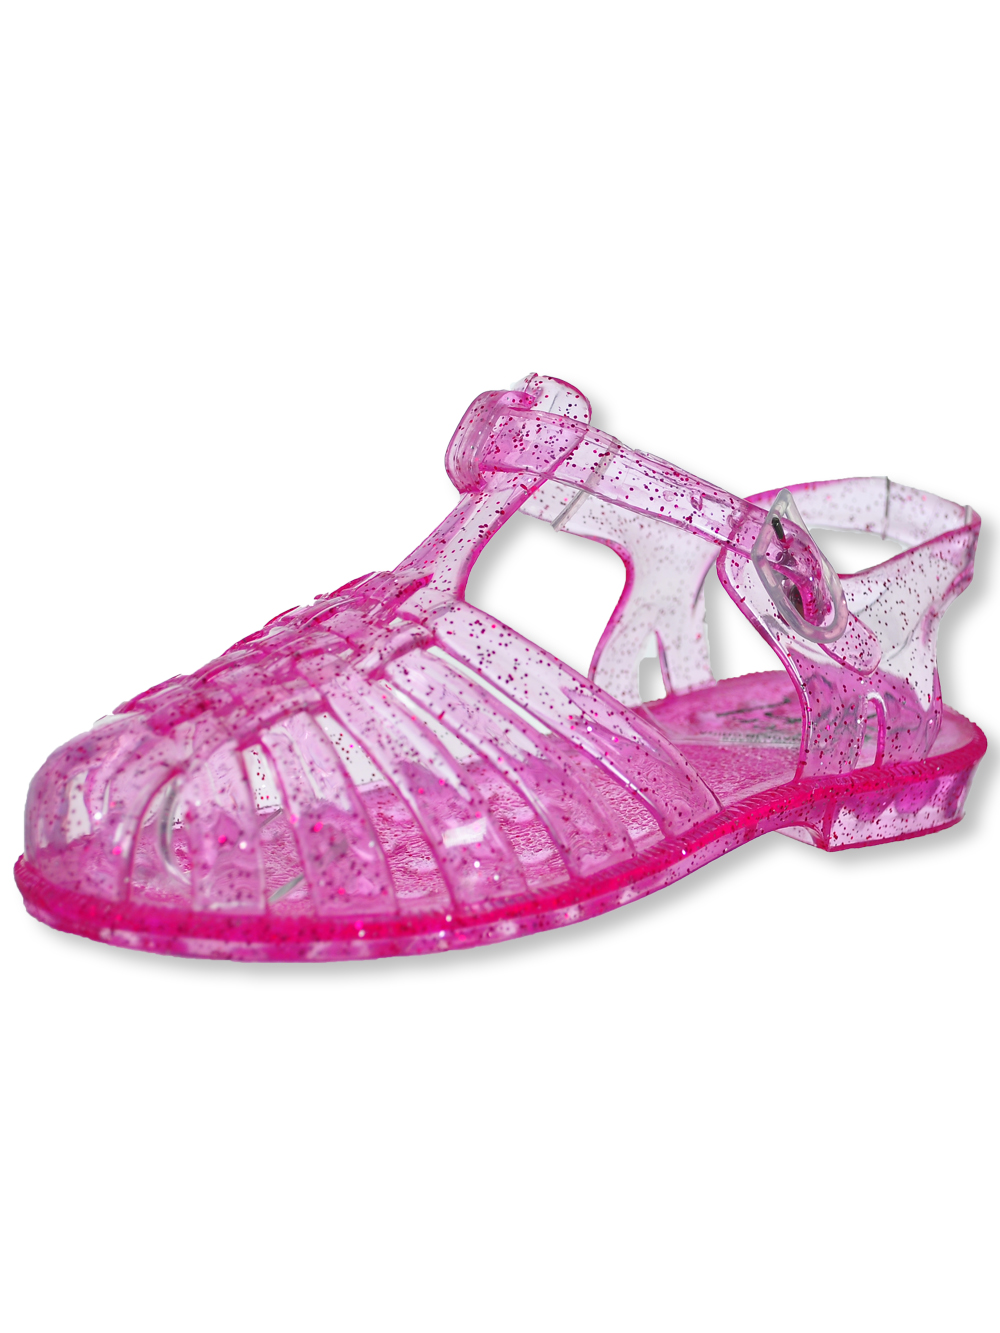 80s Jelly Sandals 